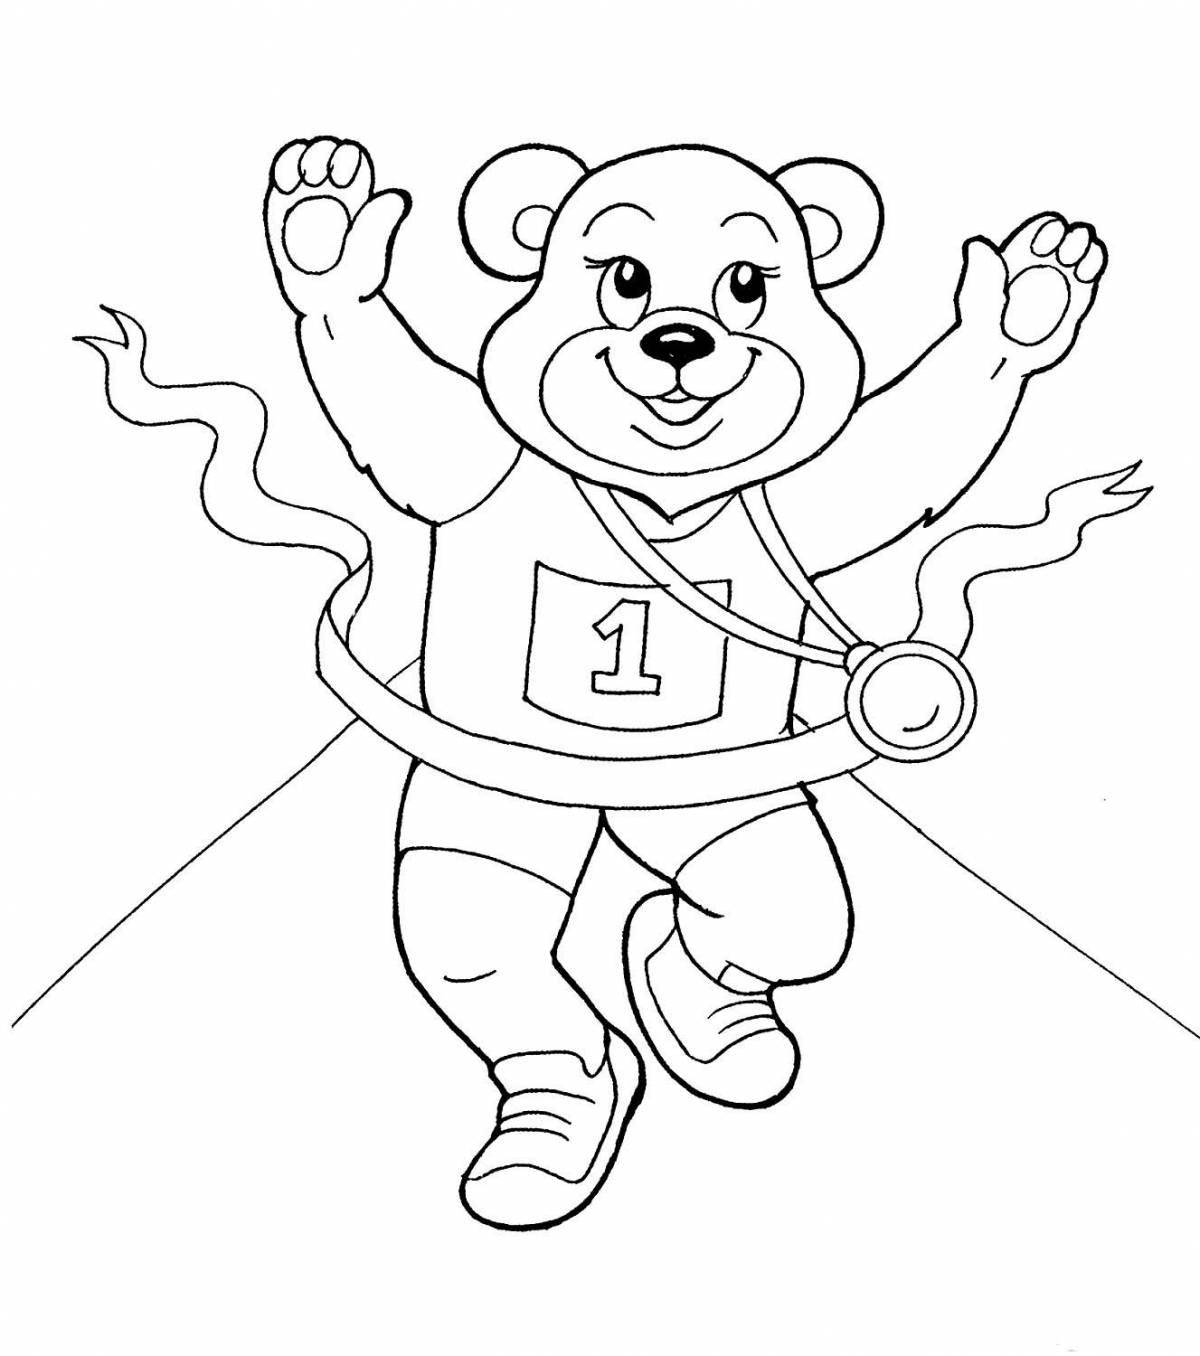 Glitter olympic bear coloring page